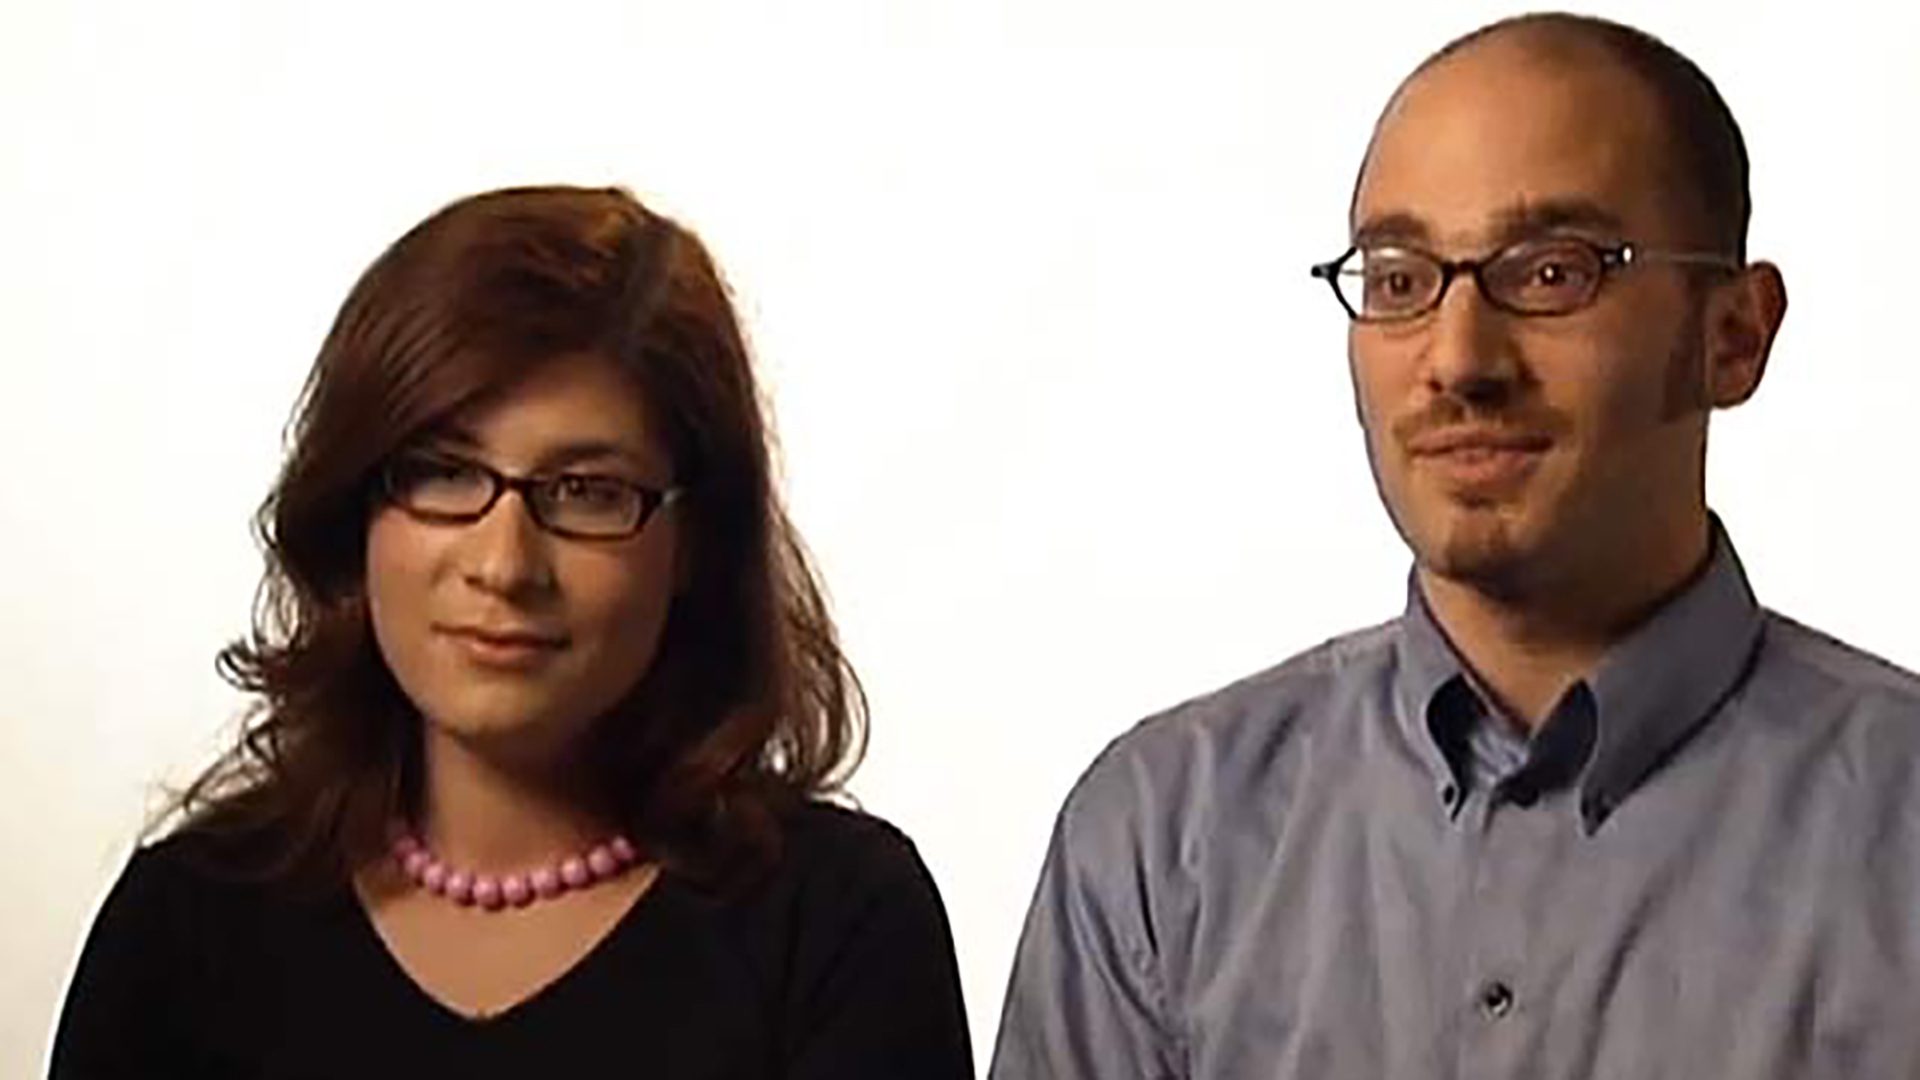 A young adult couple is interviewed against a white background